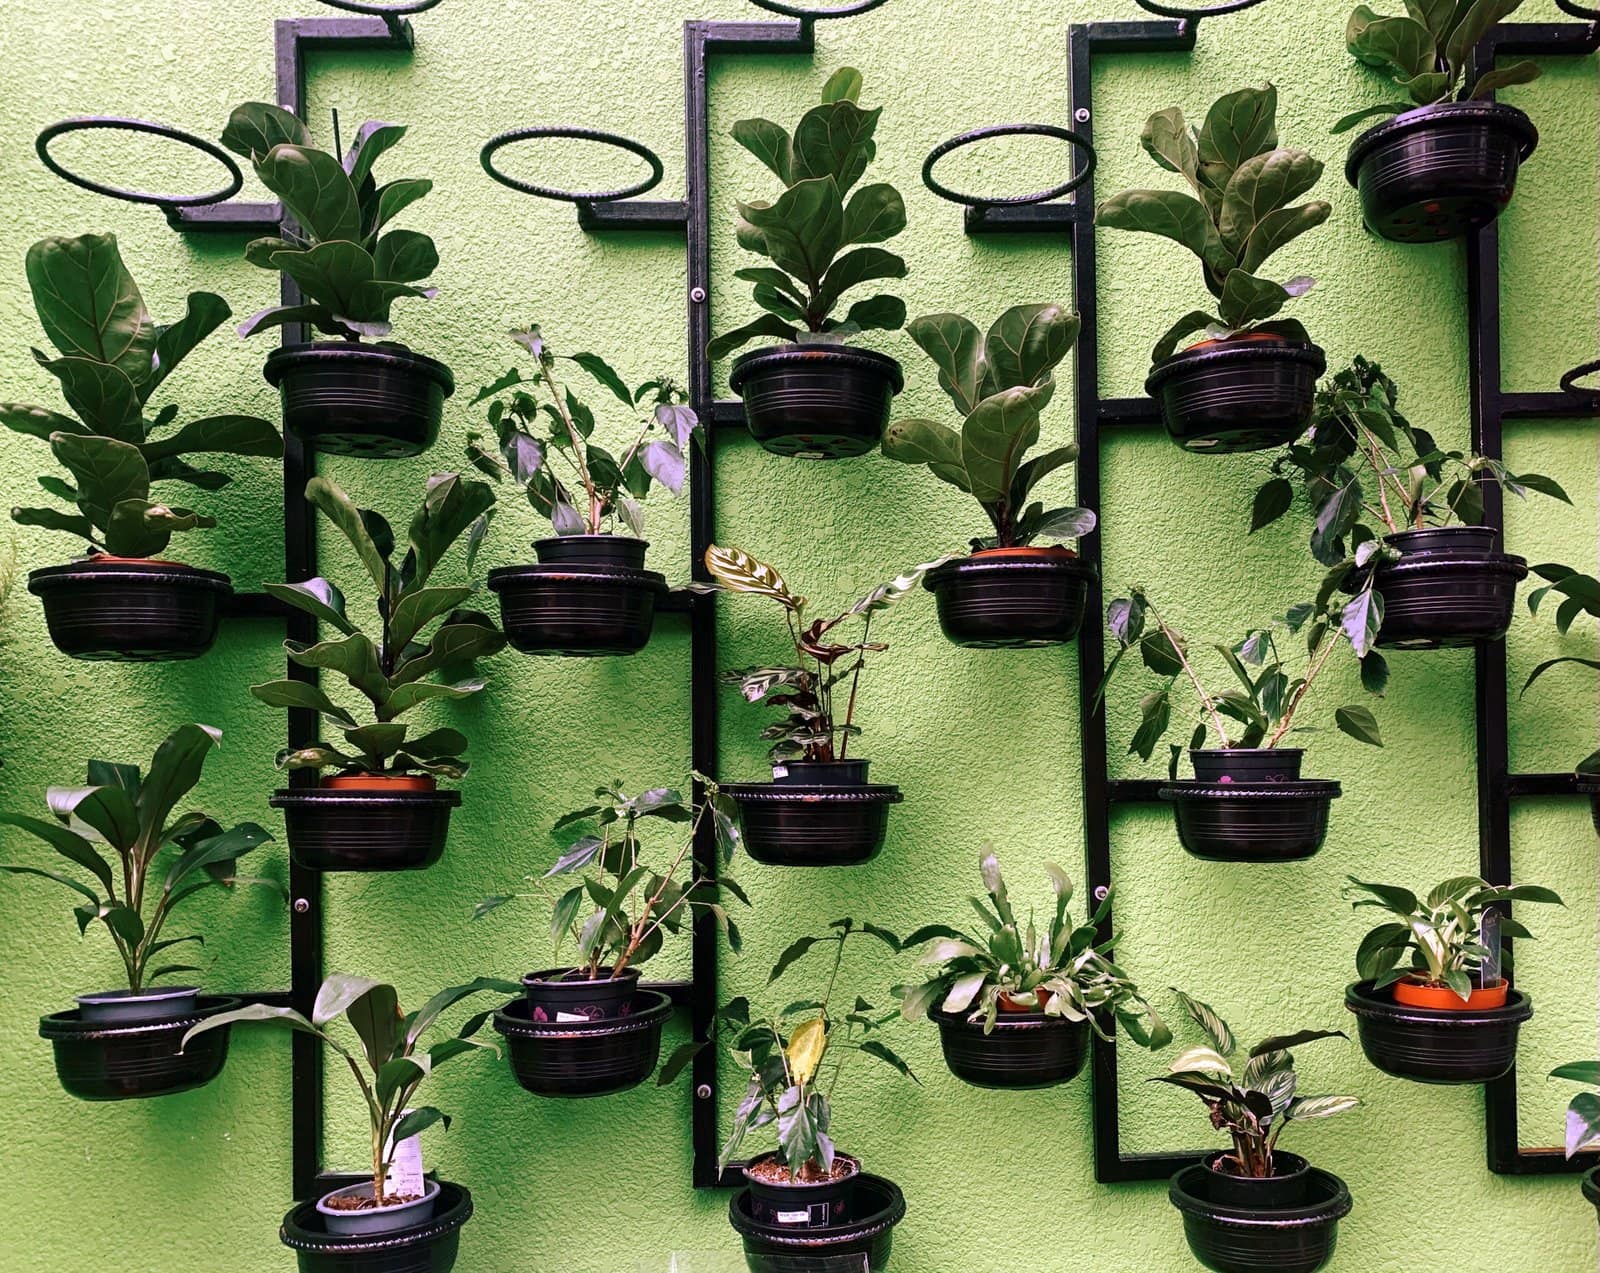 Indoor plants decorating: Potted plants hanging on the wall